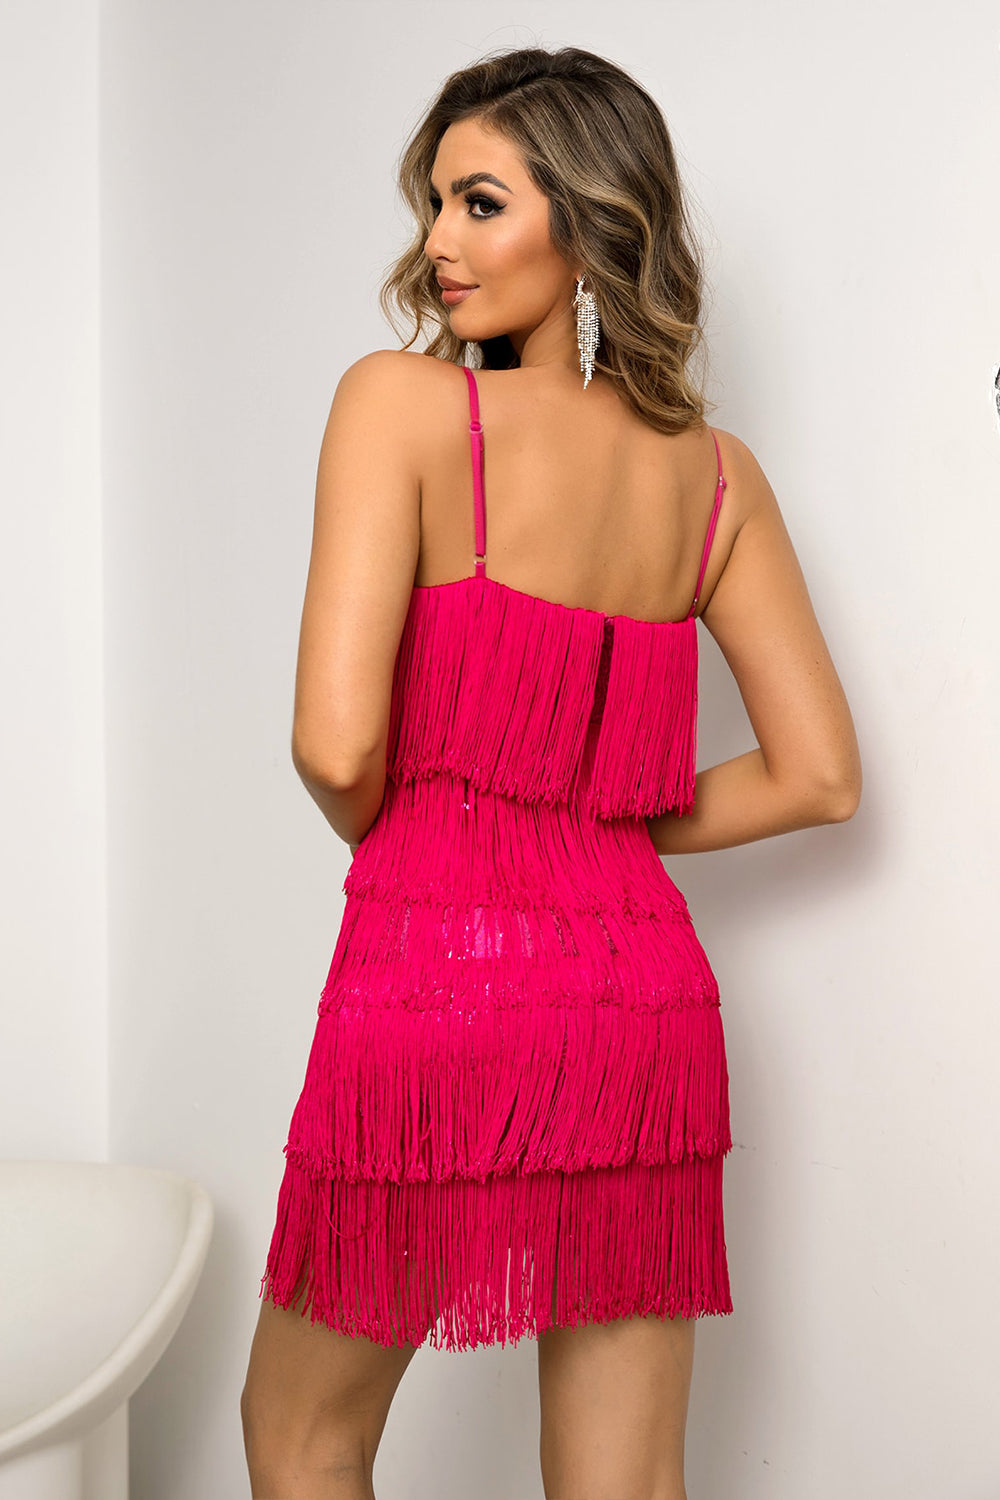 Turn heads with our Spaghetti Strap Fringe Mini Dress, perfect for any chic occasion. Feel fabulous and dance the night away in vibrant style.